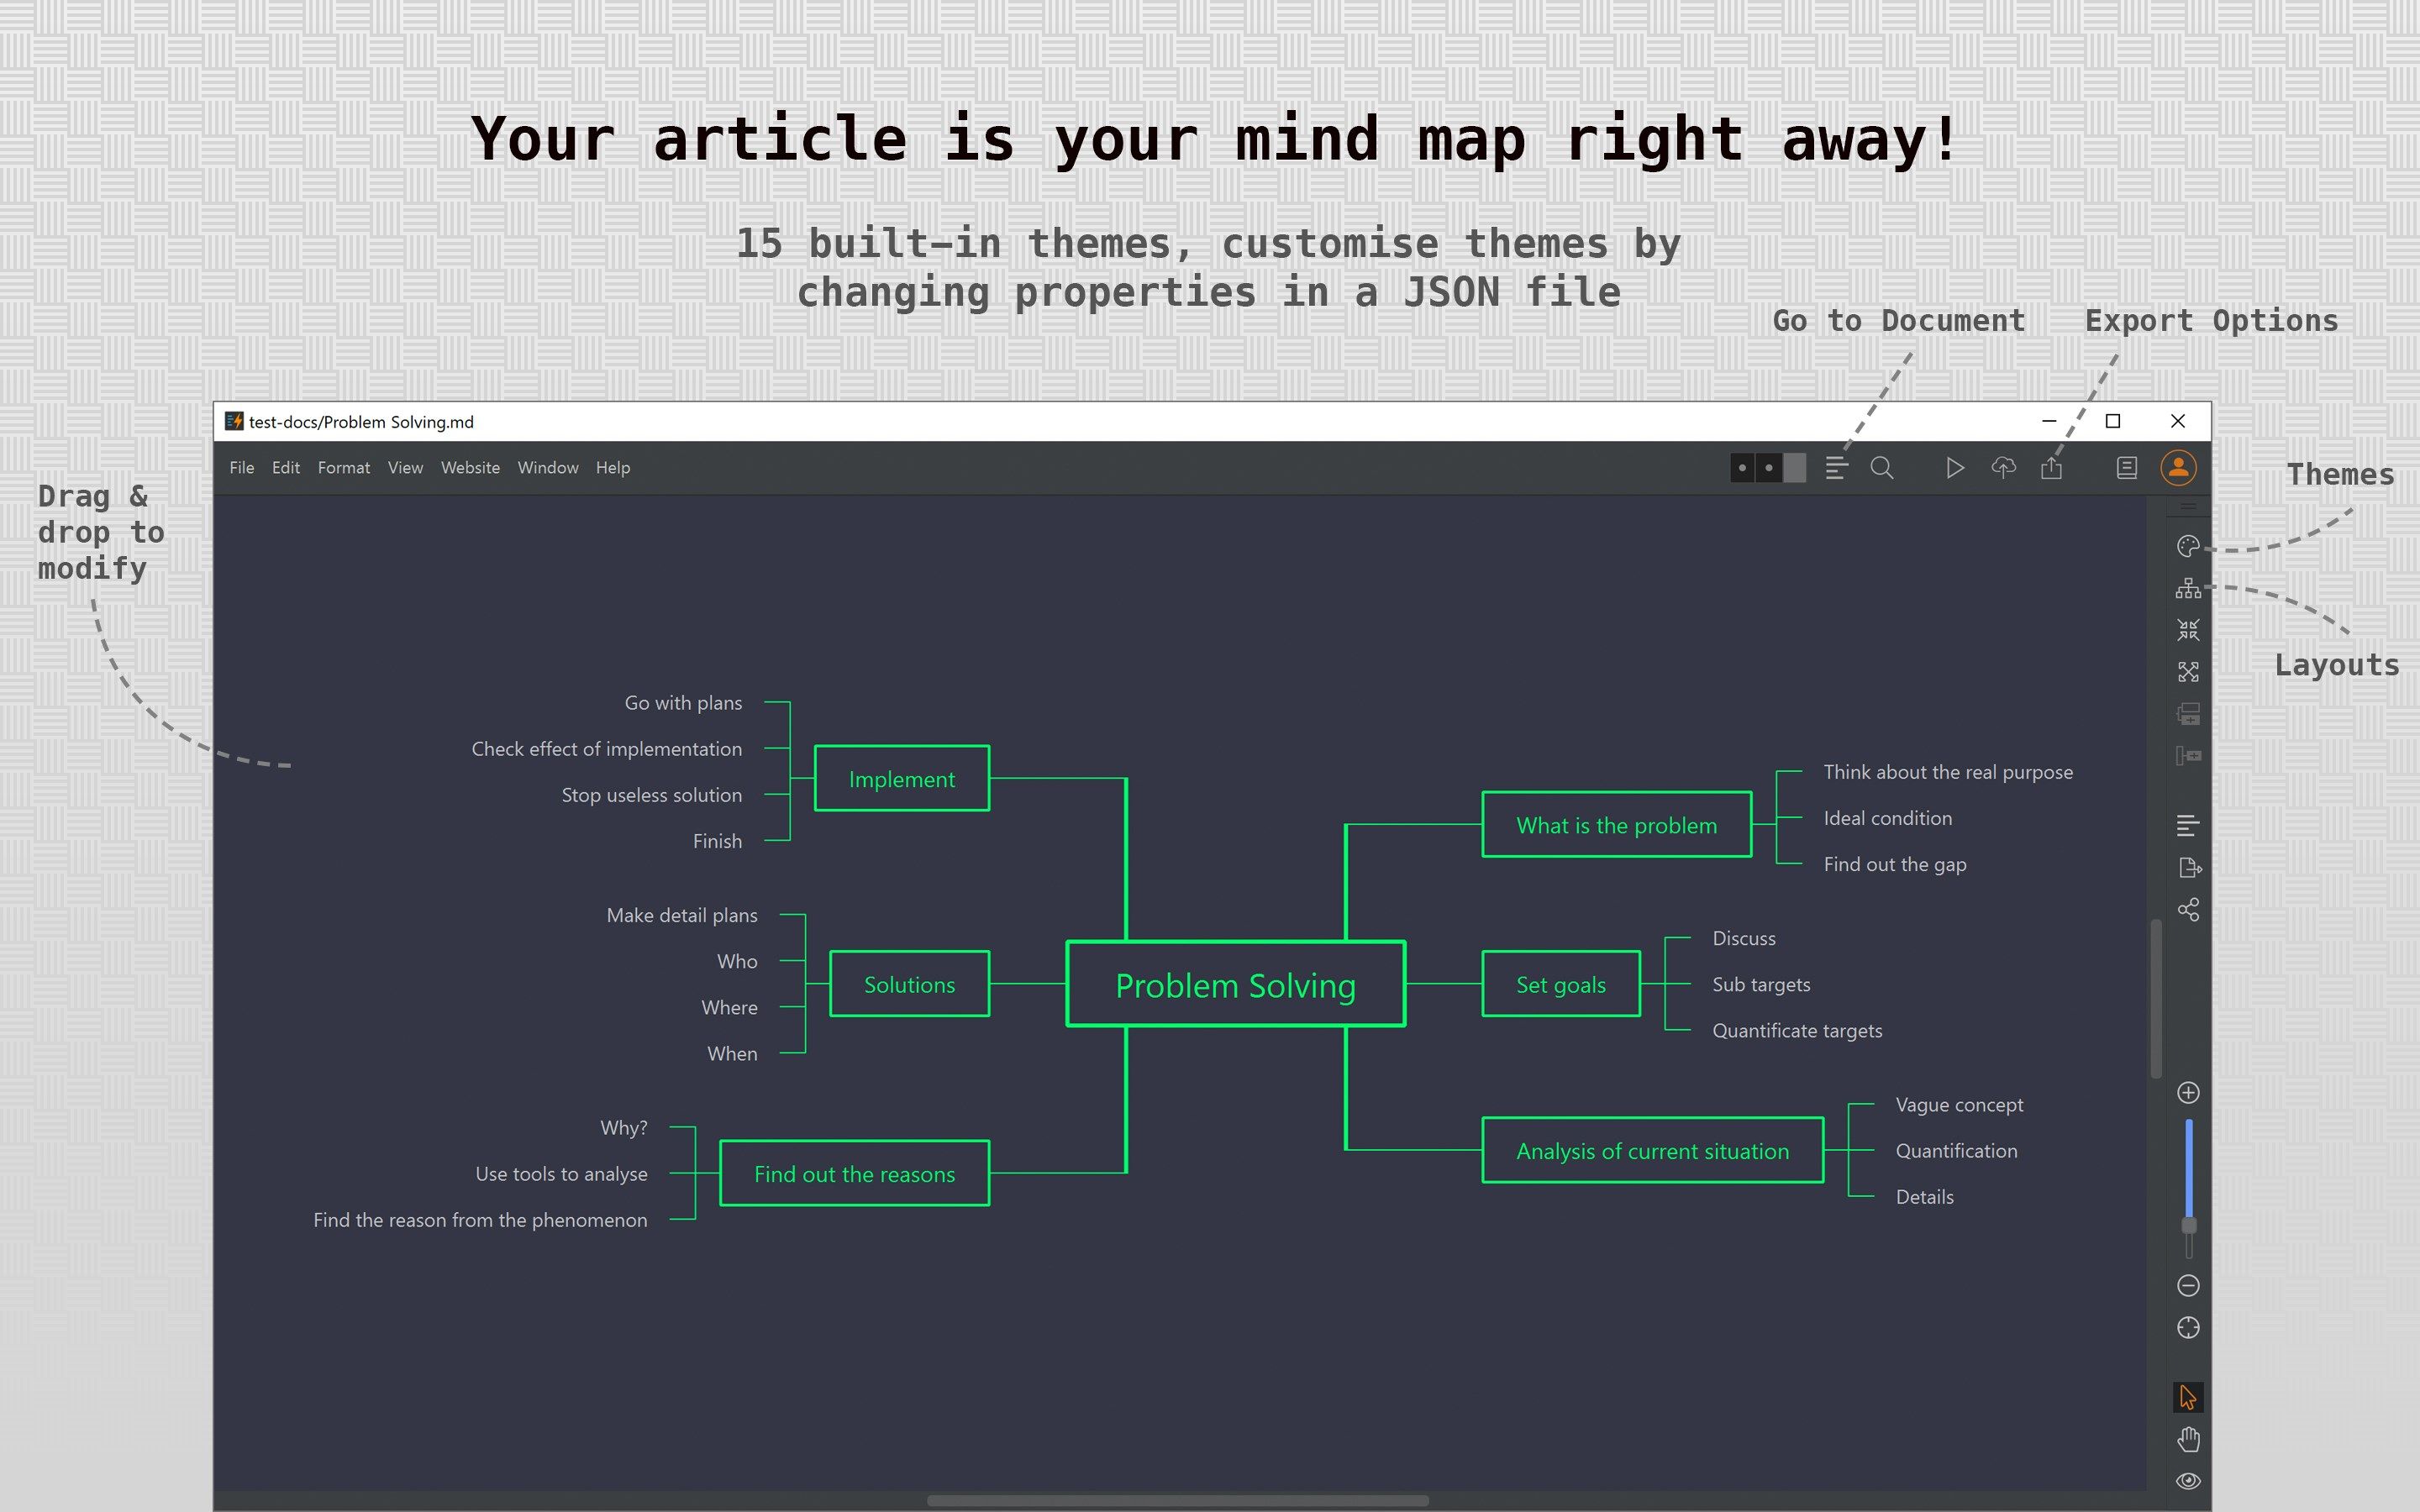 Your article is your mind map right away!